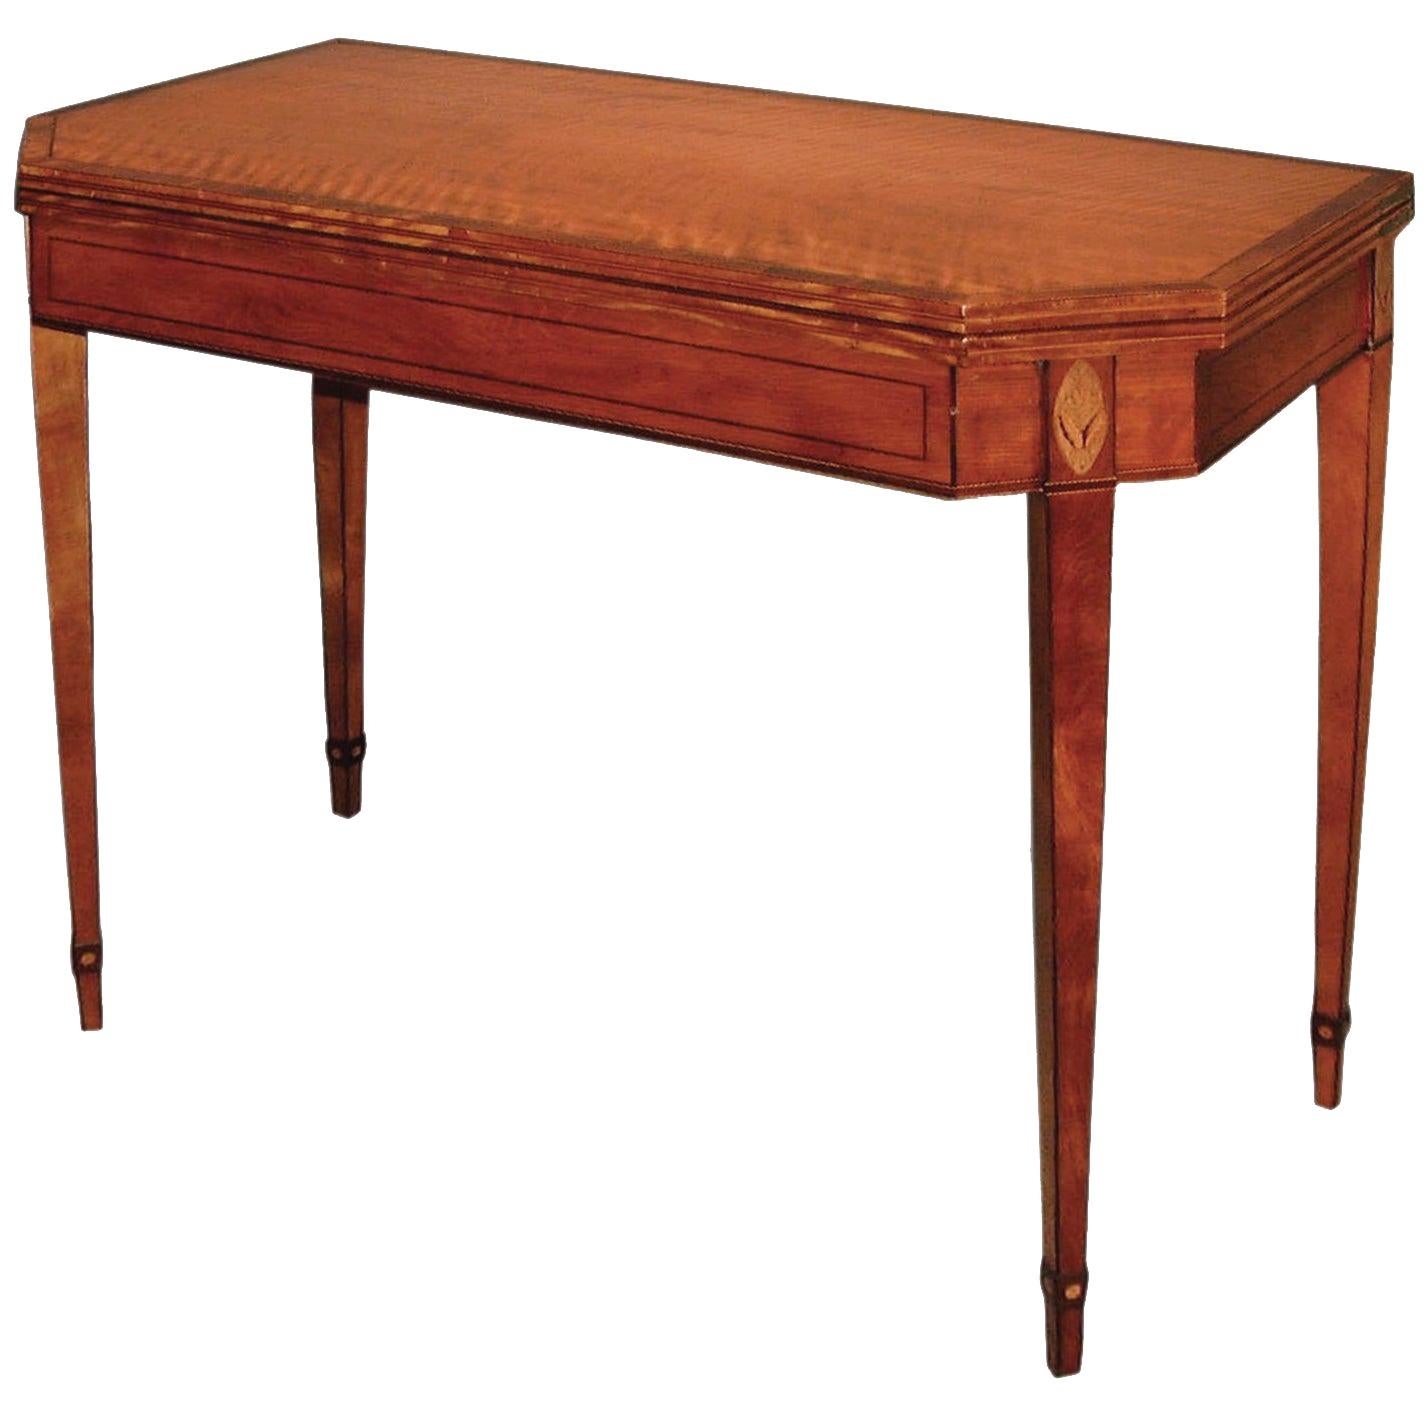 Late 18th Century Sheraton Period Satinwood Card Table For Sale